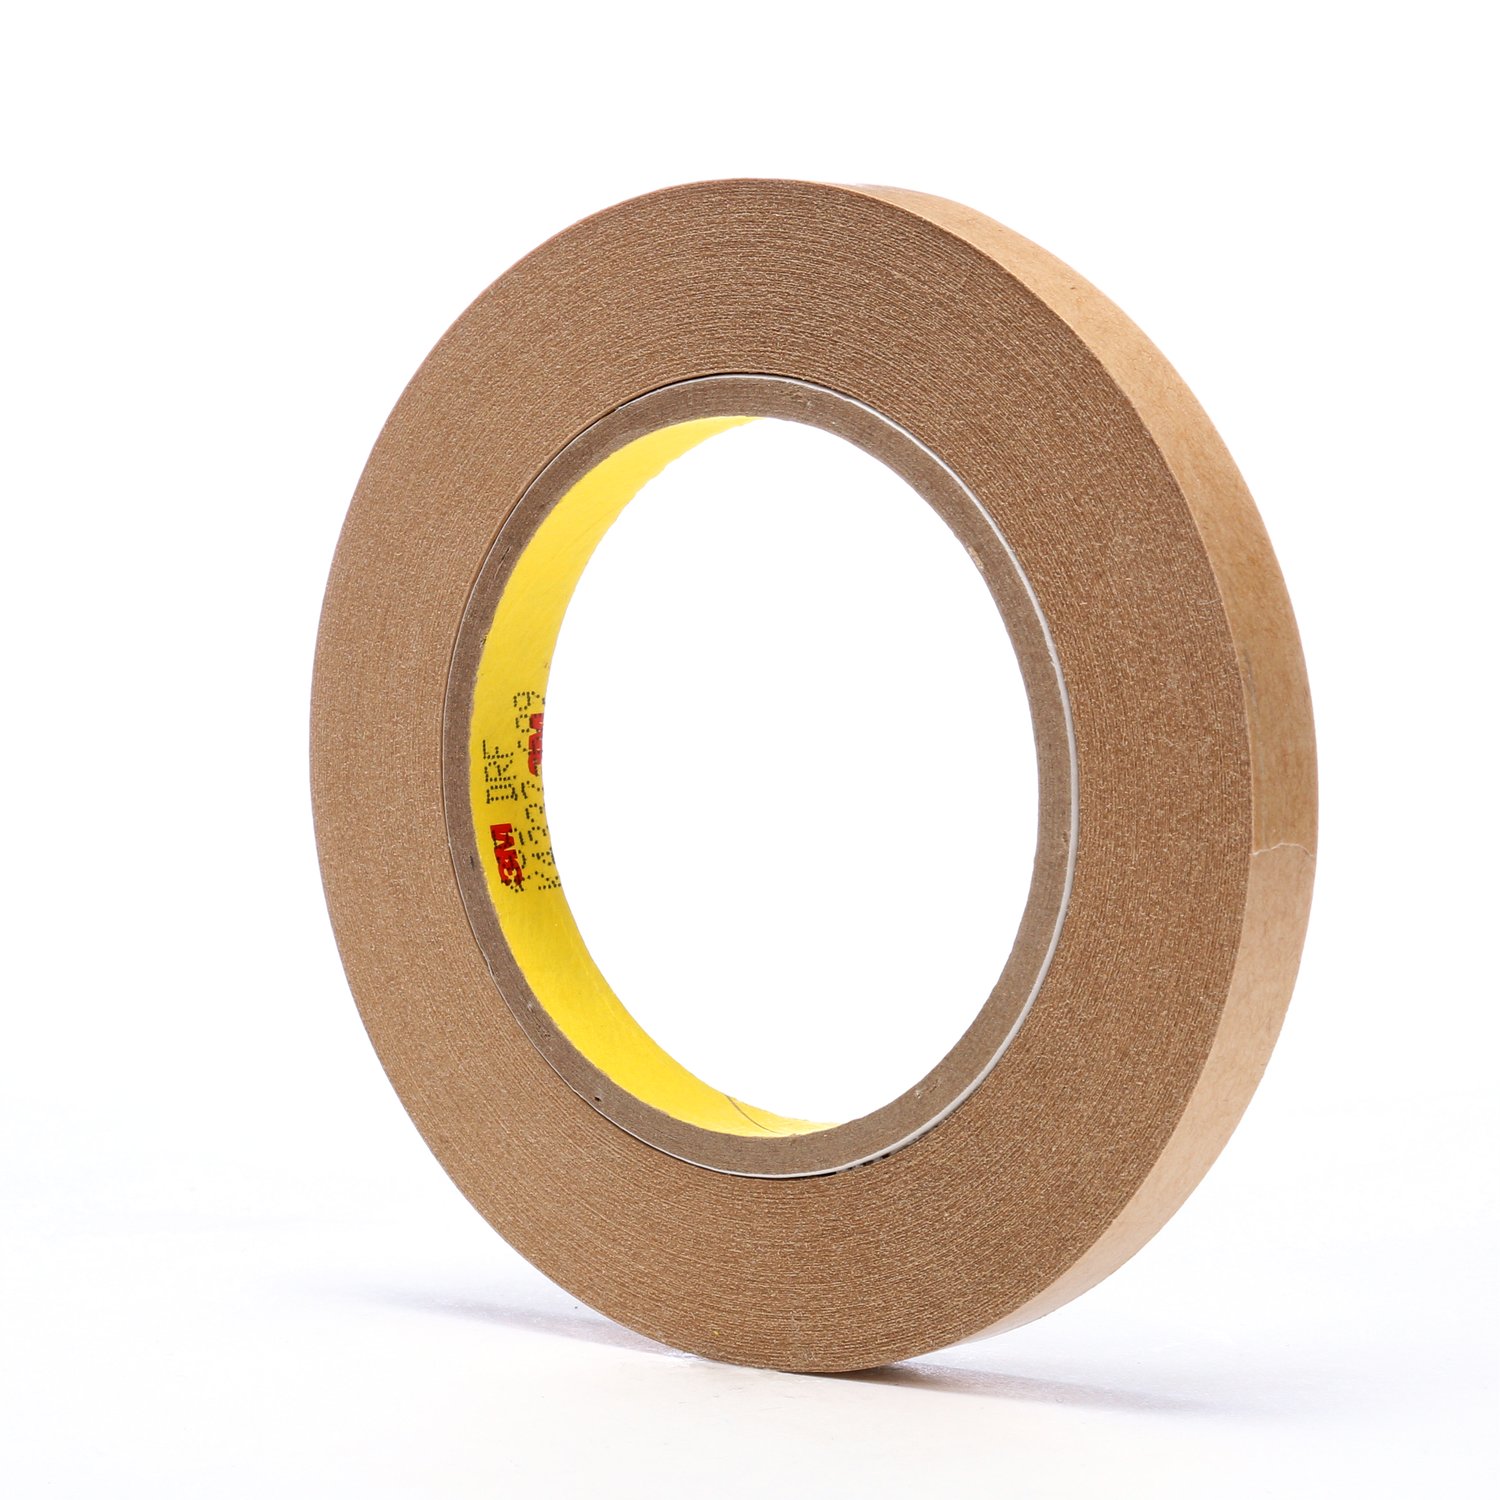 7000122480 - 3M Adhesive Transfer Tape 465, Clear, 1/2 in x 60 yd, 2 mil, 72 rolls
per case